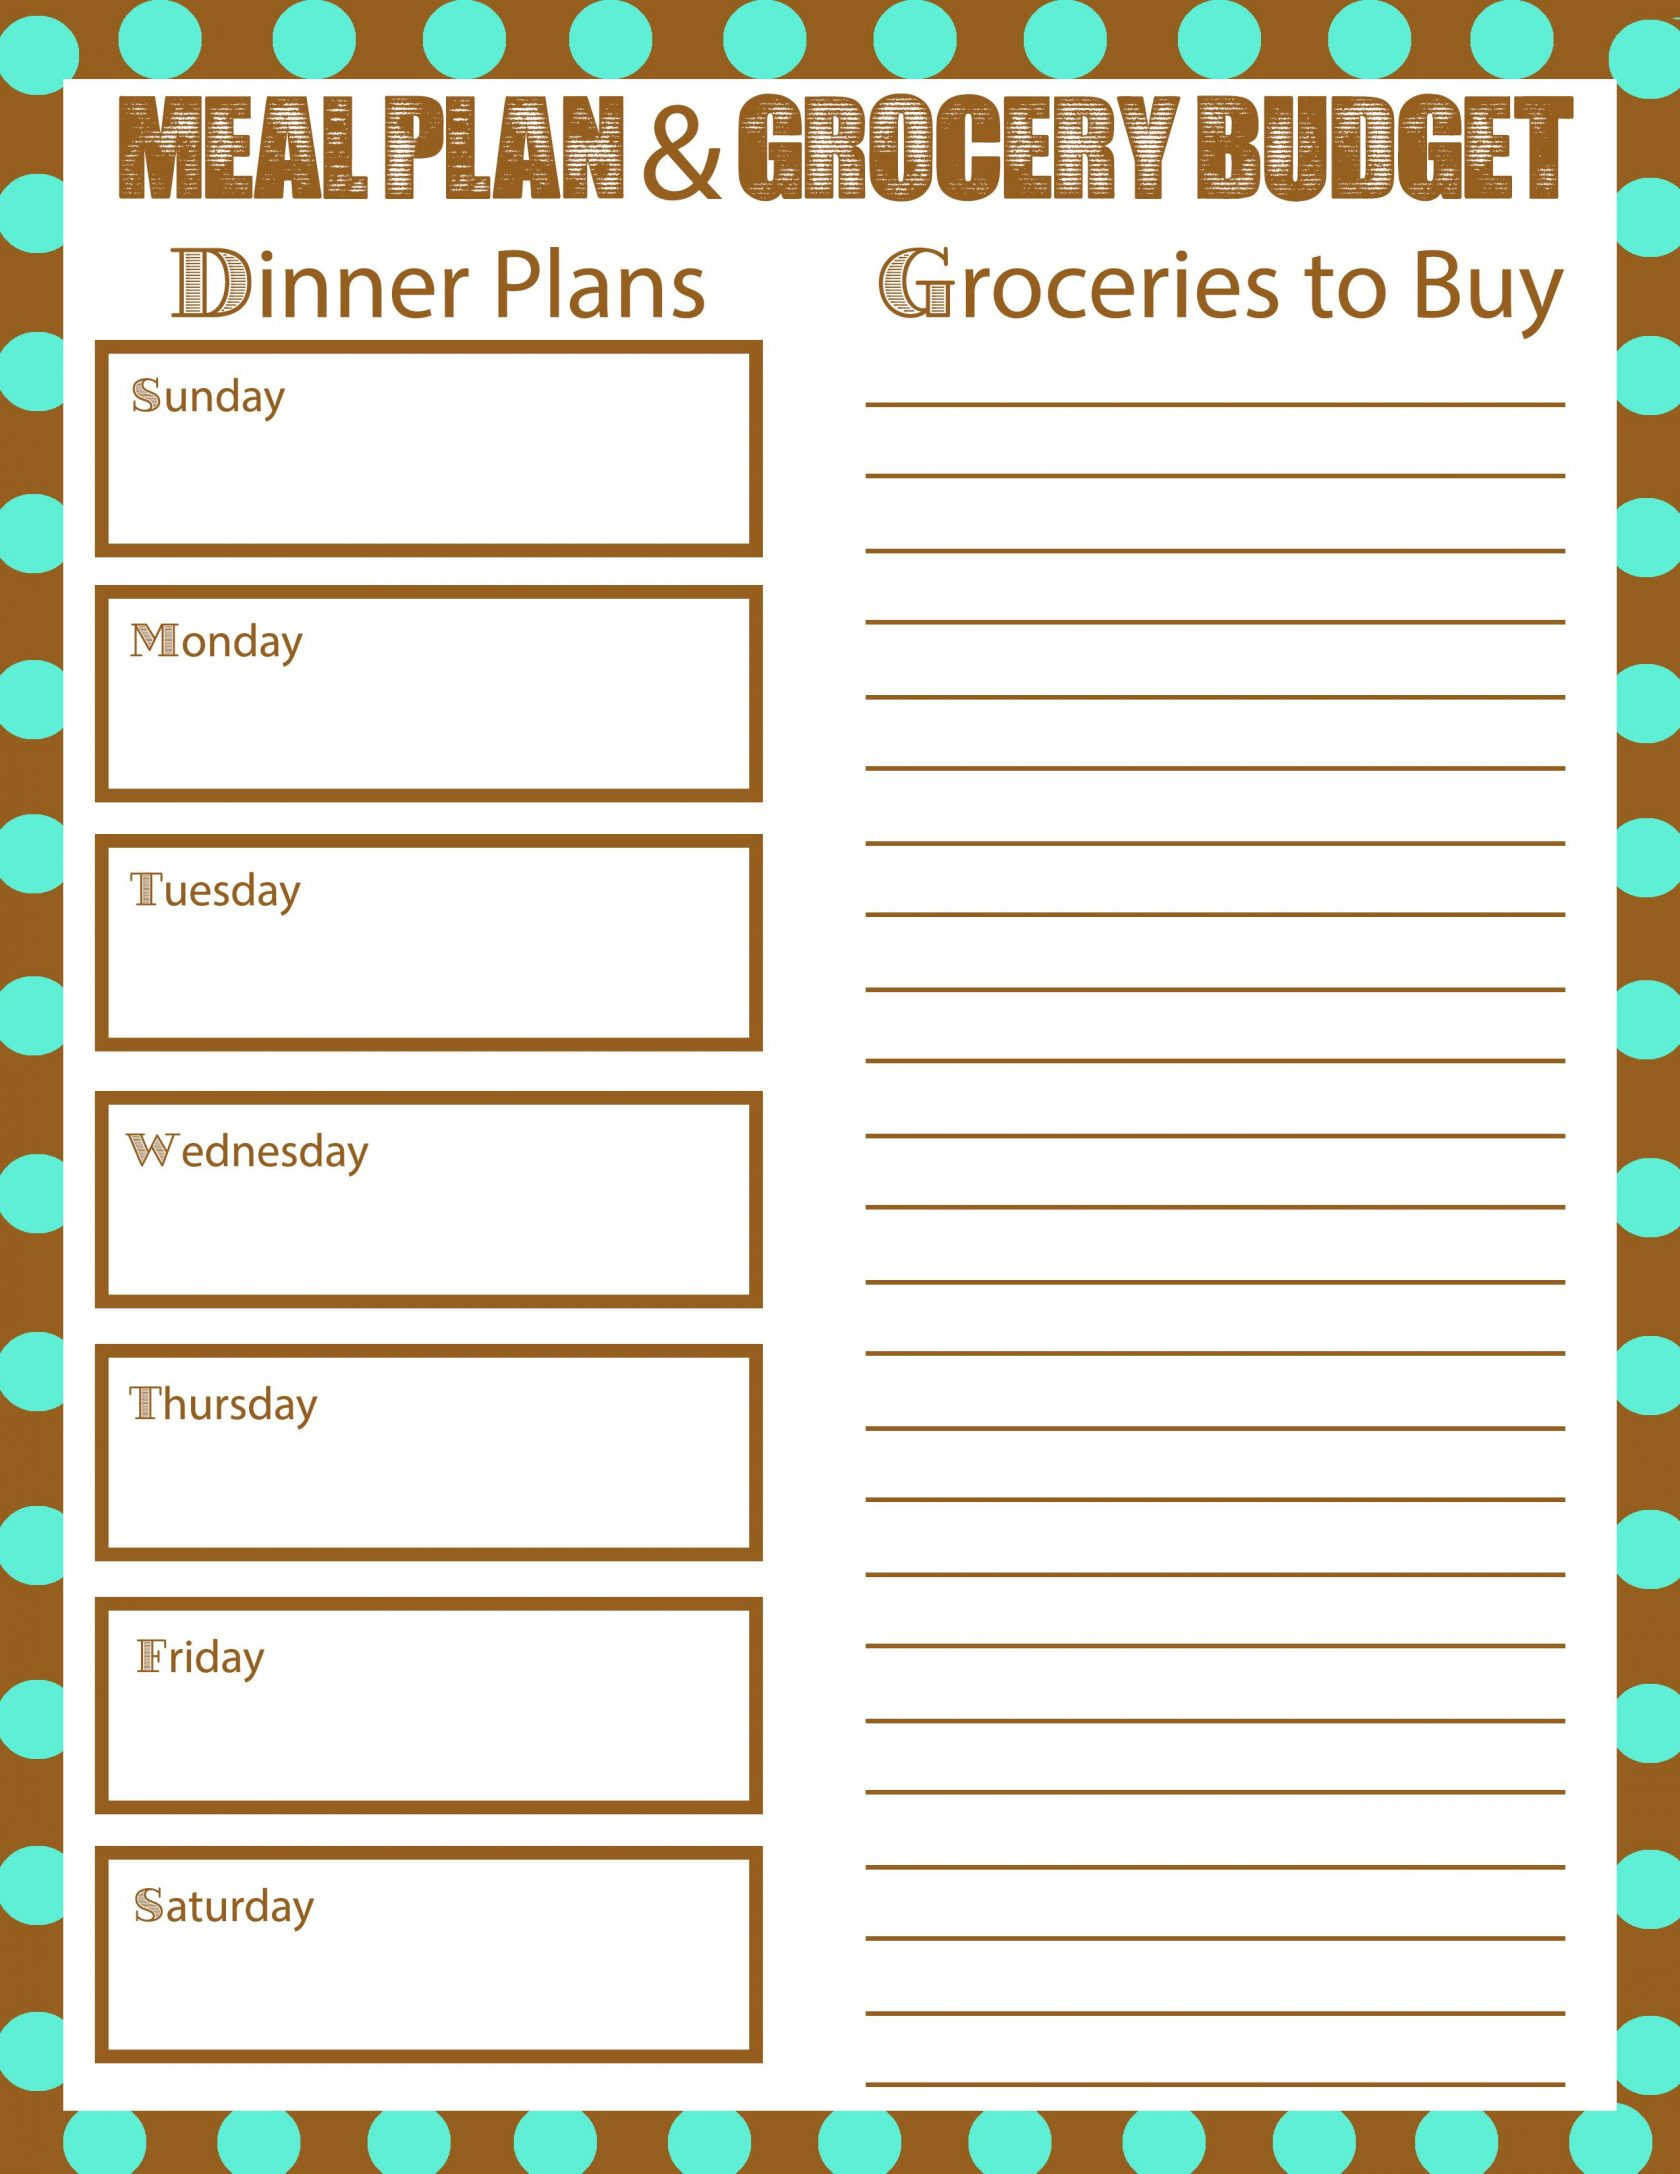 grocery-expenses-spreadsheet-within-grocery-list-budget-hashtag-bg-db